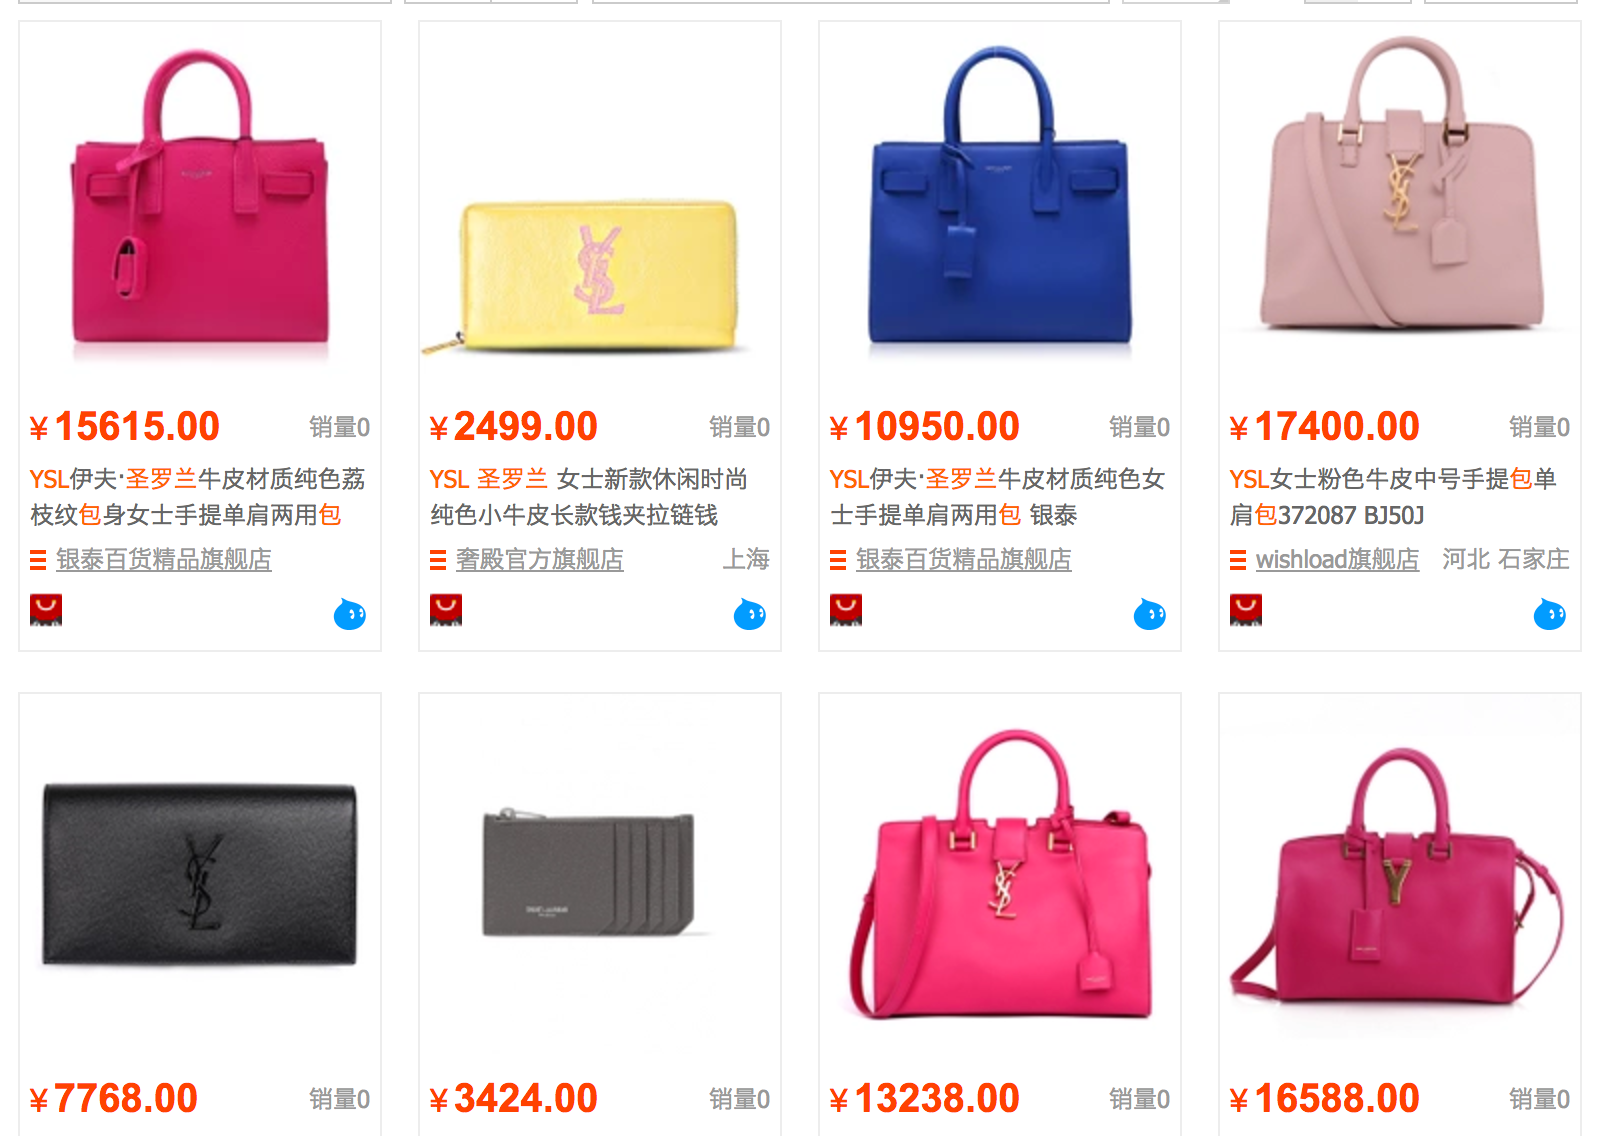 Listings for YSL bags on Taobao claiming to be real. 